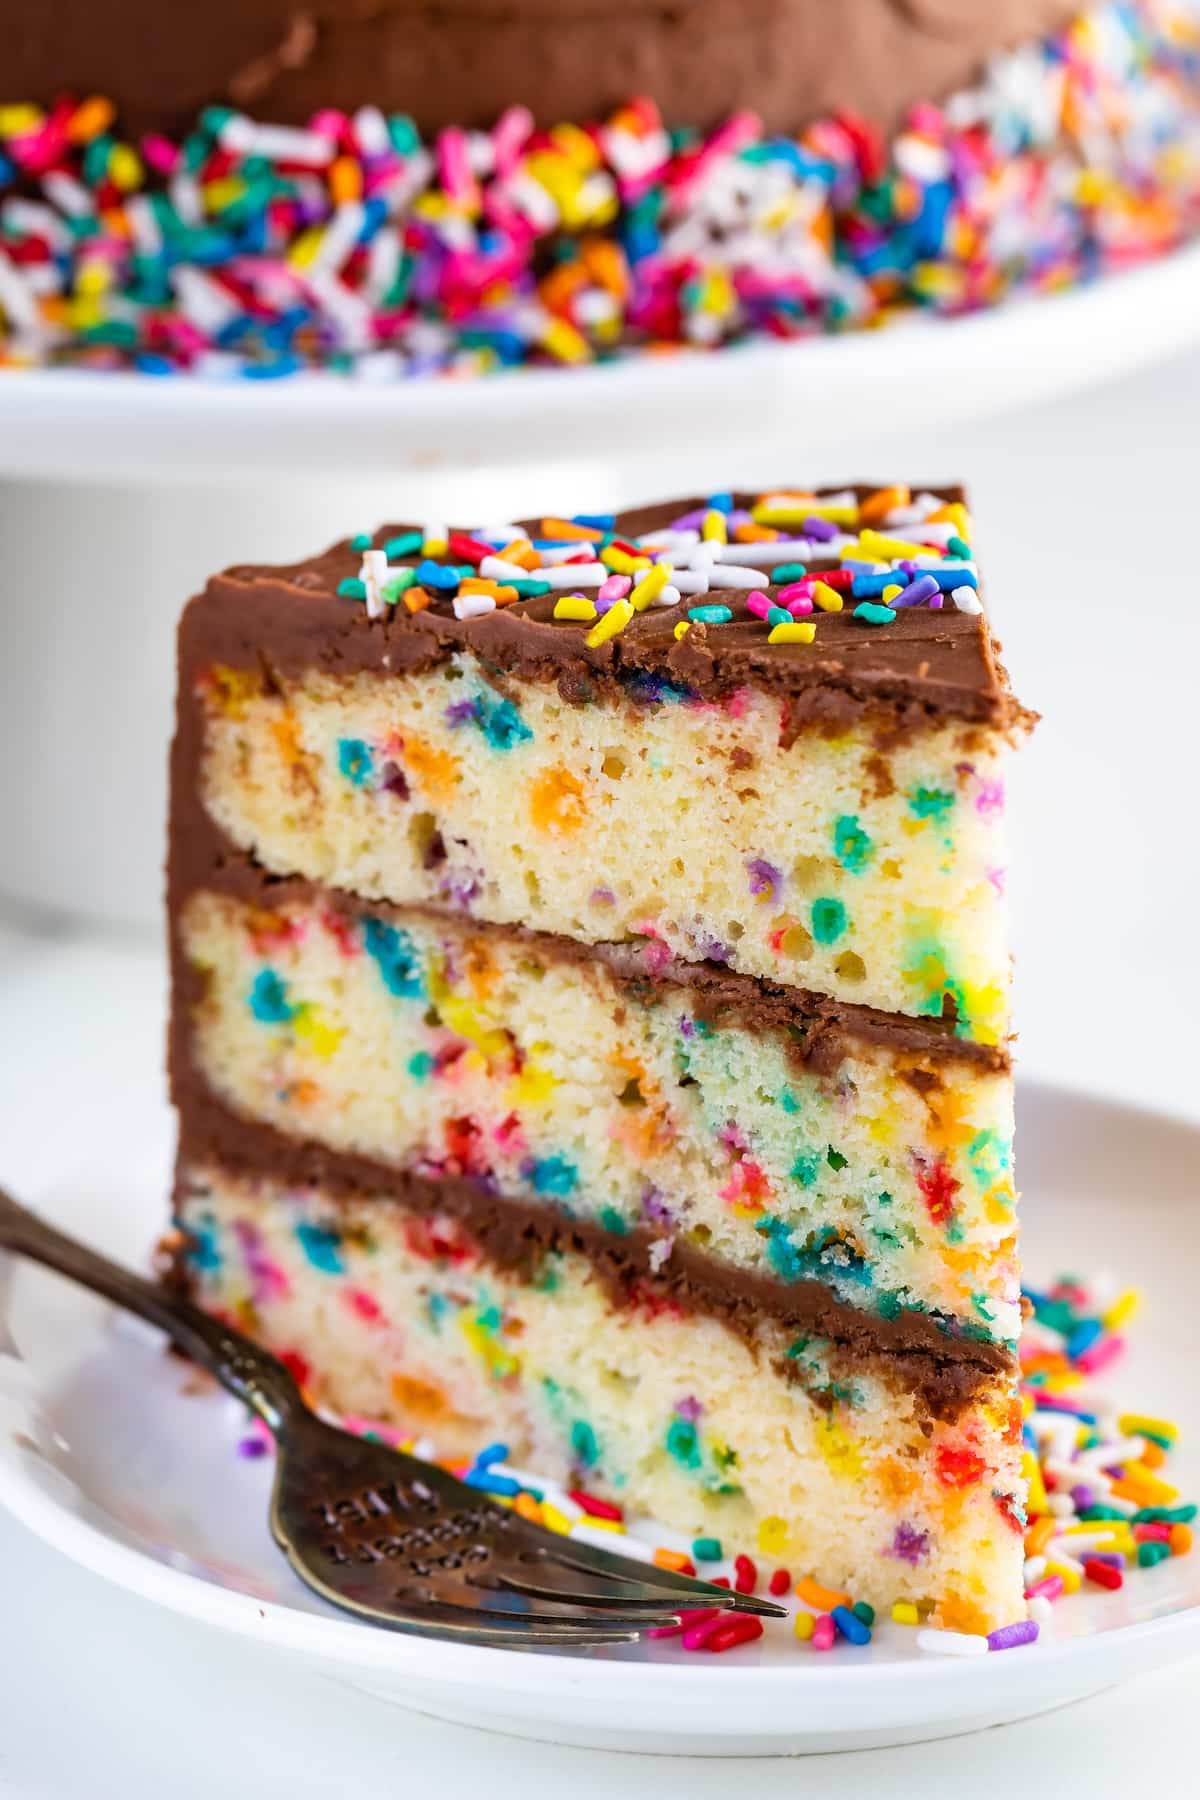 one slice of birthday cake with chocolate frosting and sprinkles on top.